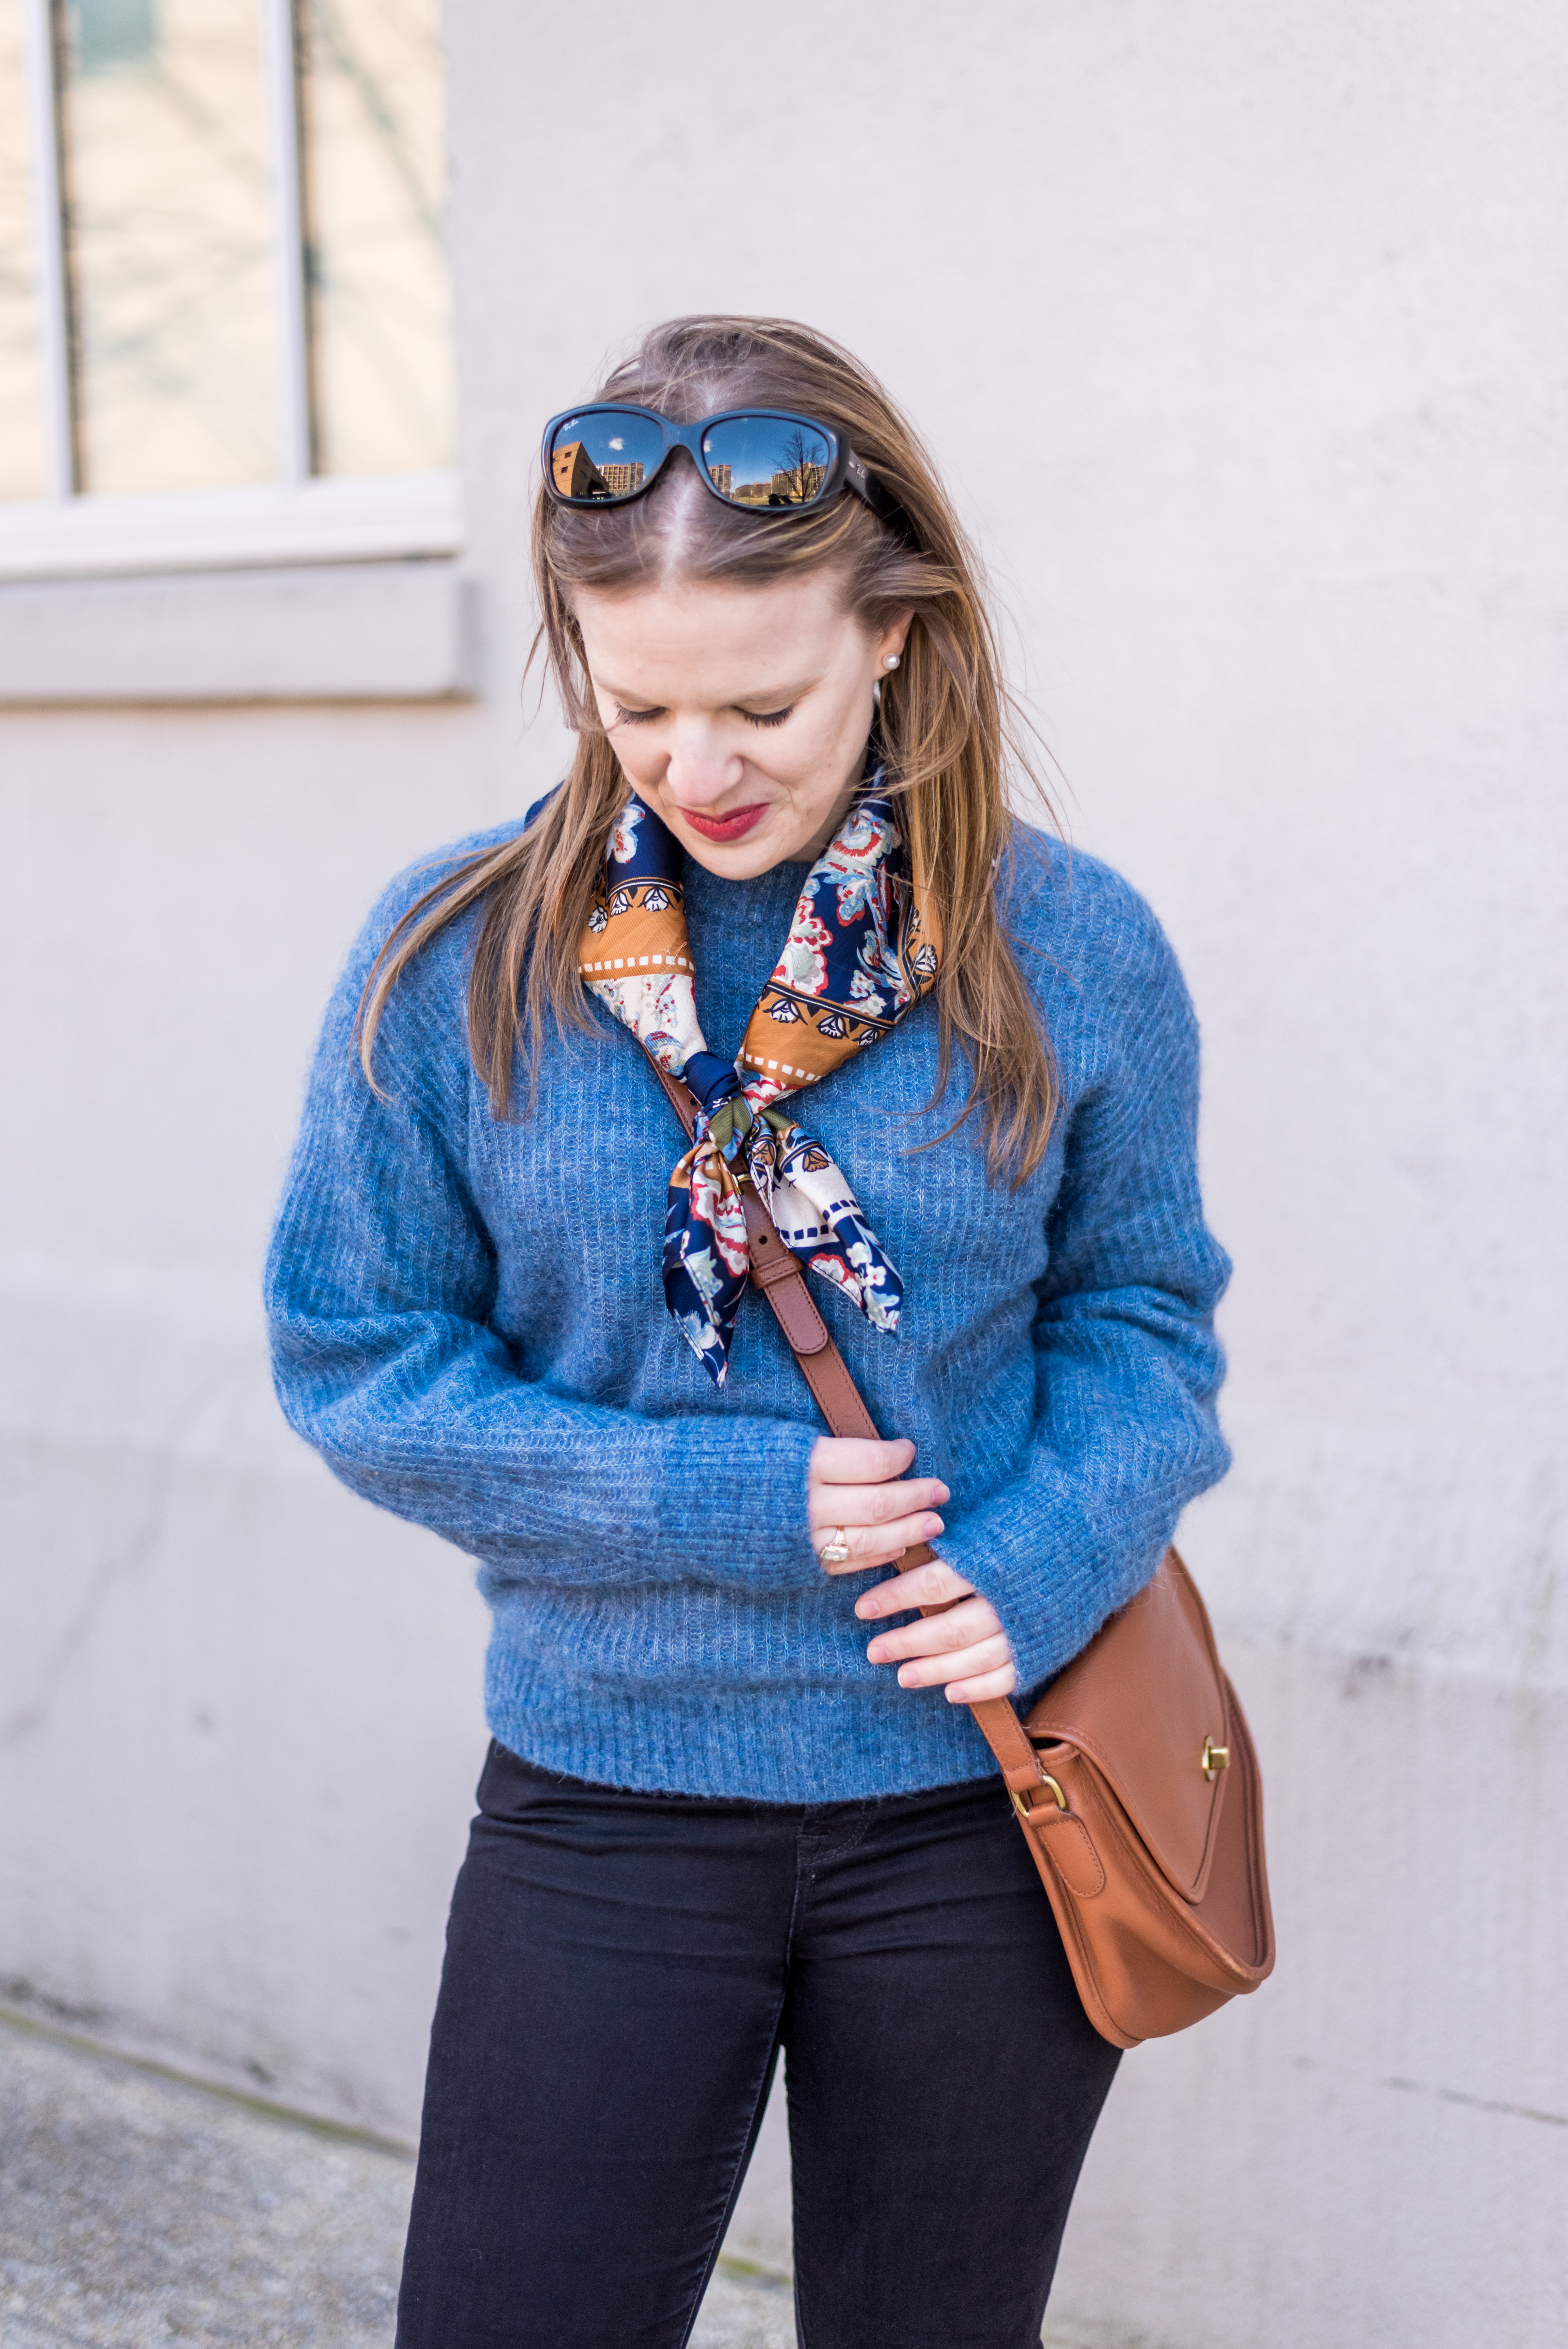 DC woman blogger is featuring Everlane The Oversized Alpaca Crew